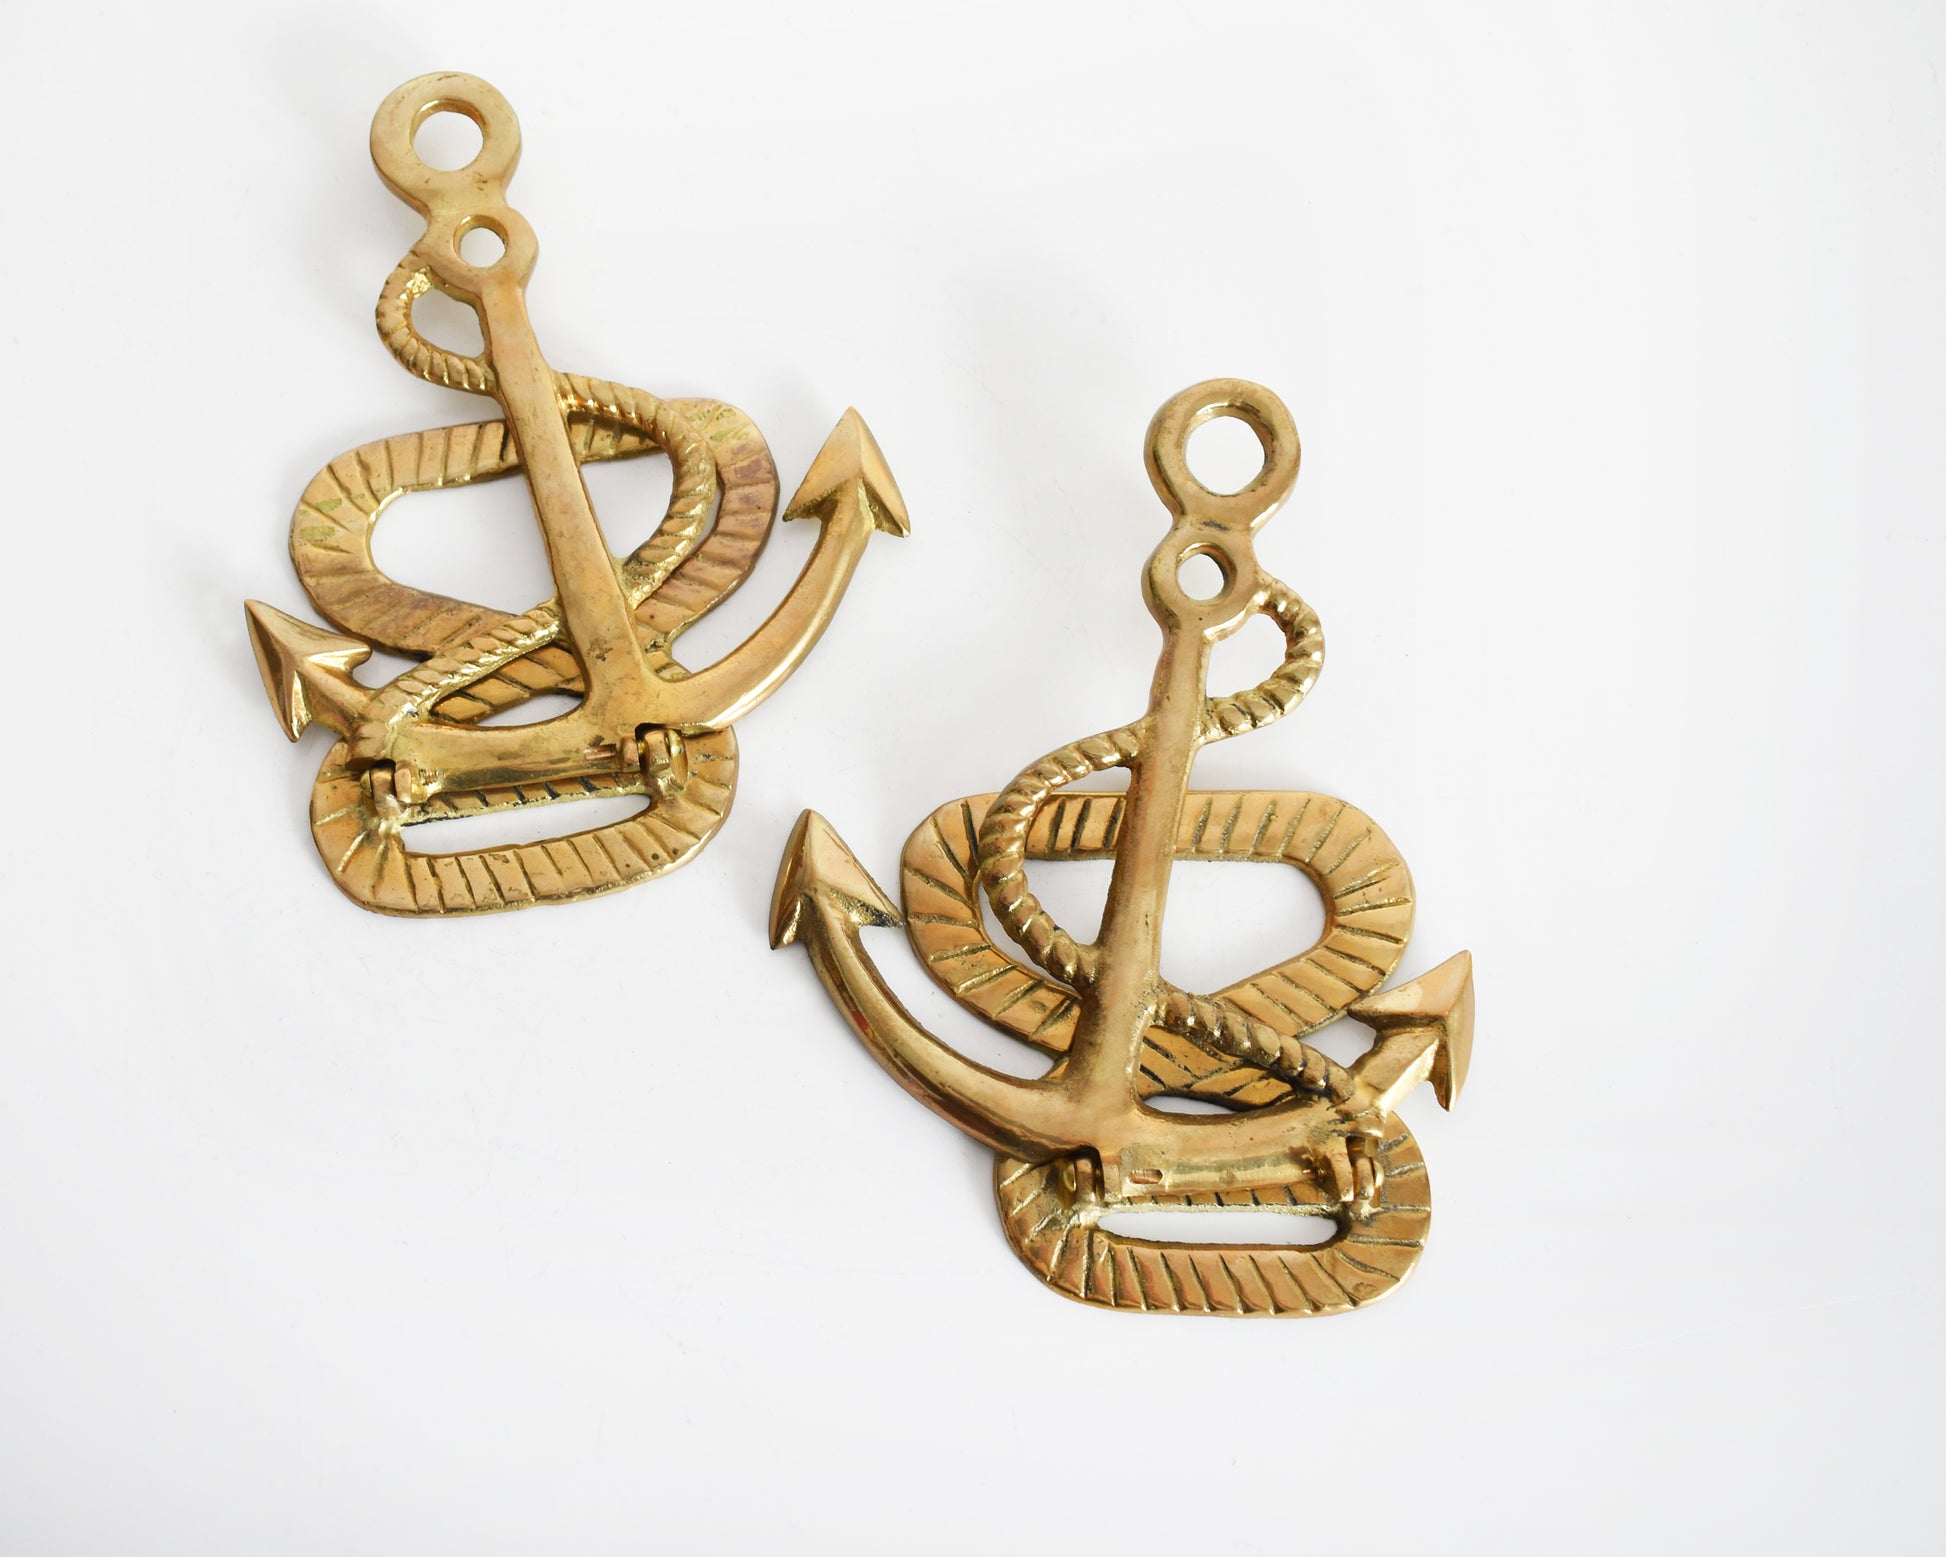 Two vintage brass anchor and rope bookends. The anchors are folded down in this photo